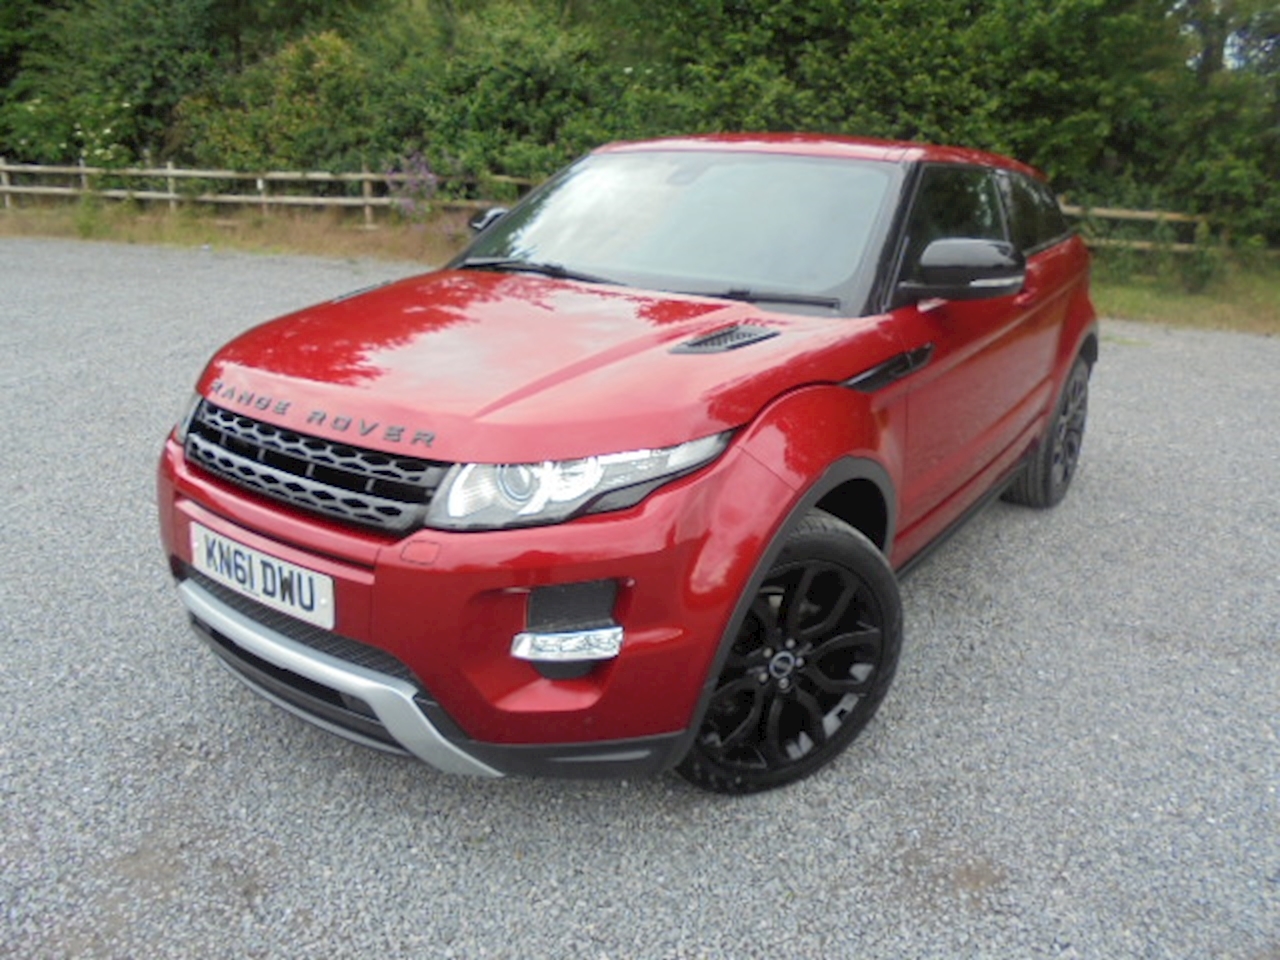 Range Rover Evoque Sd4 Dynamic Coupe 2.2 Automatic Diesel